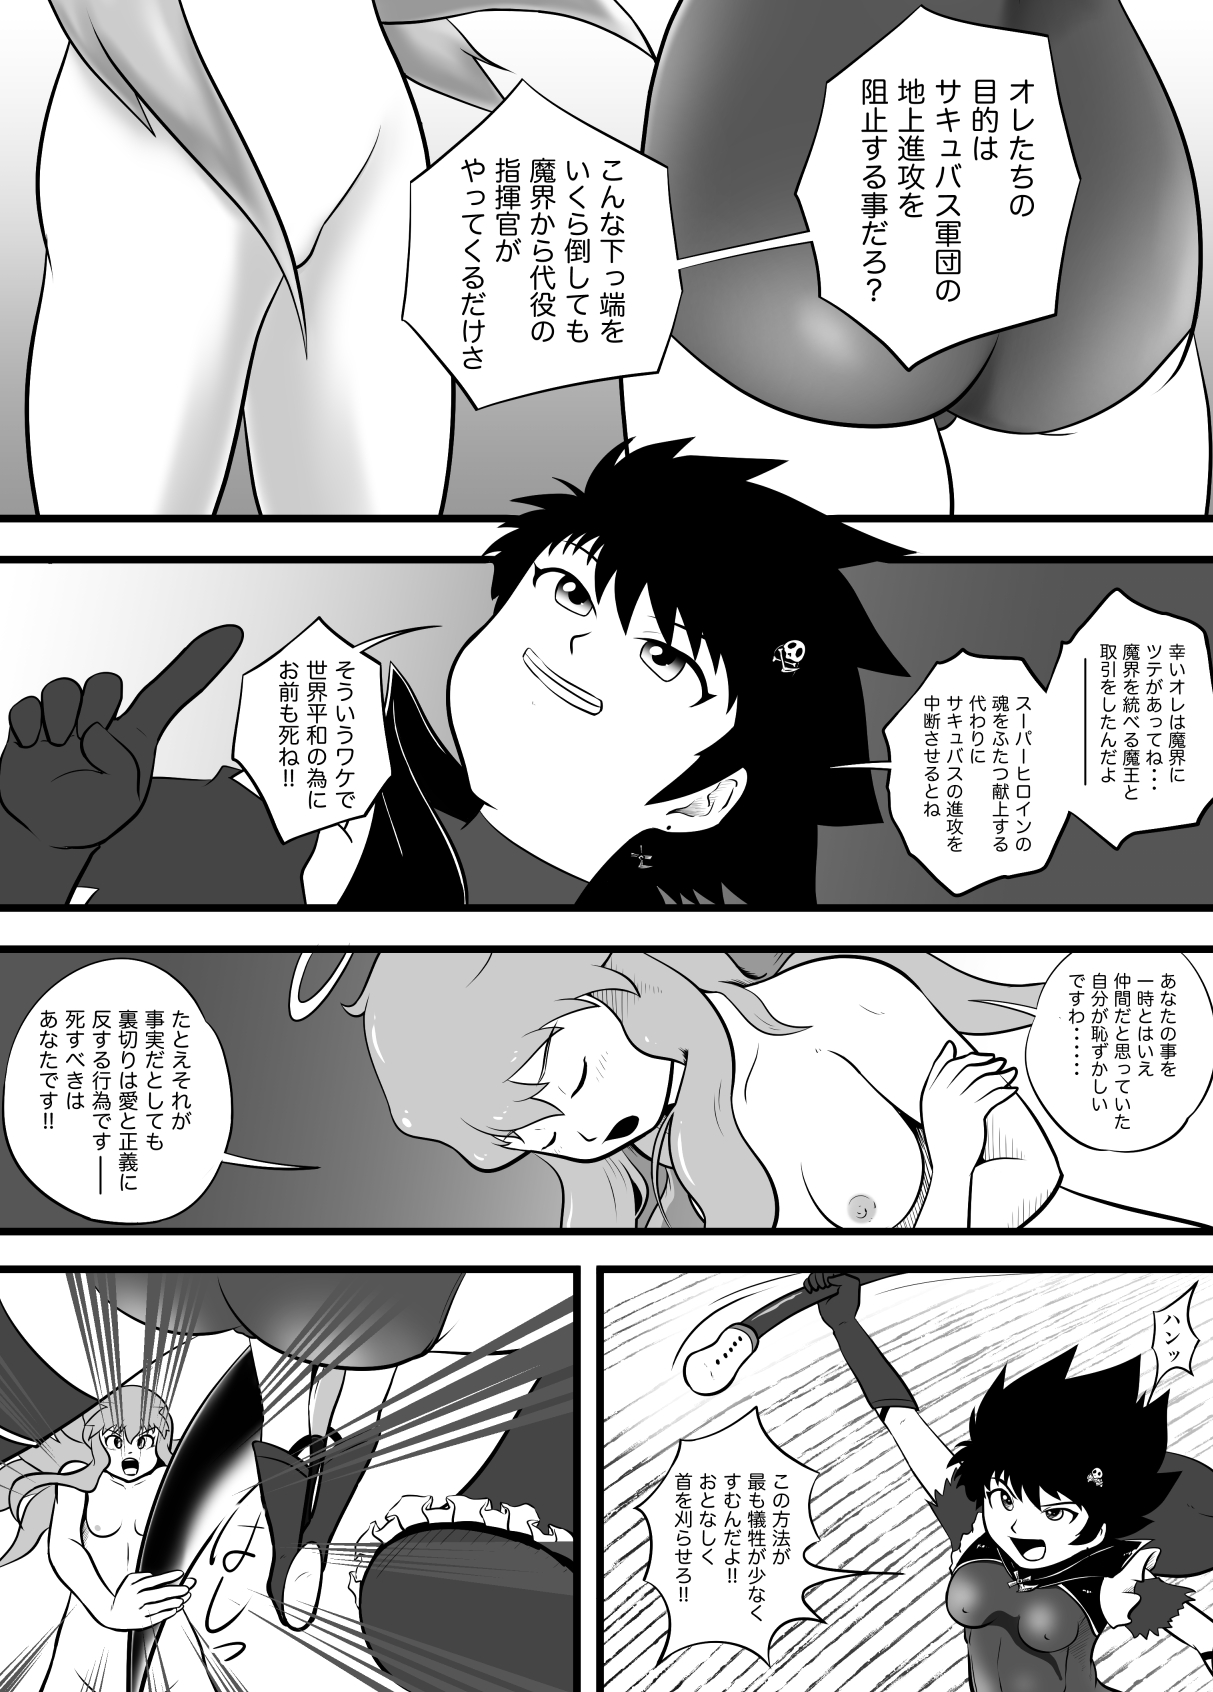 Guilty Black page 15 full